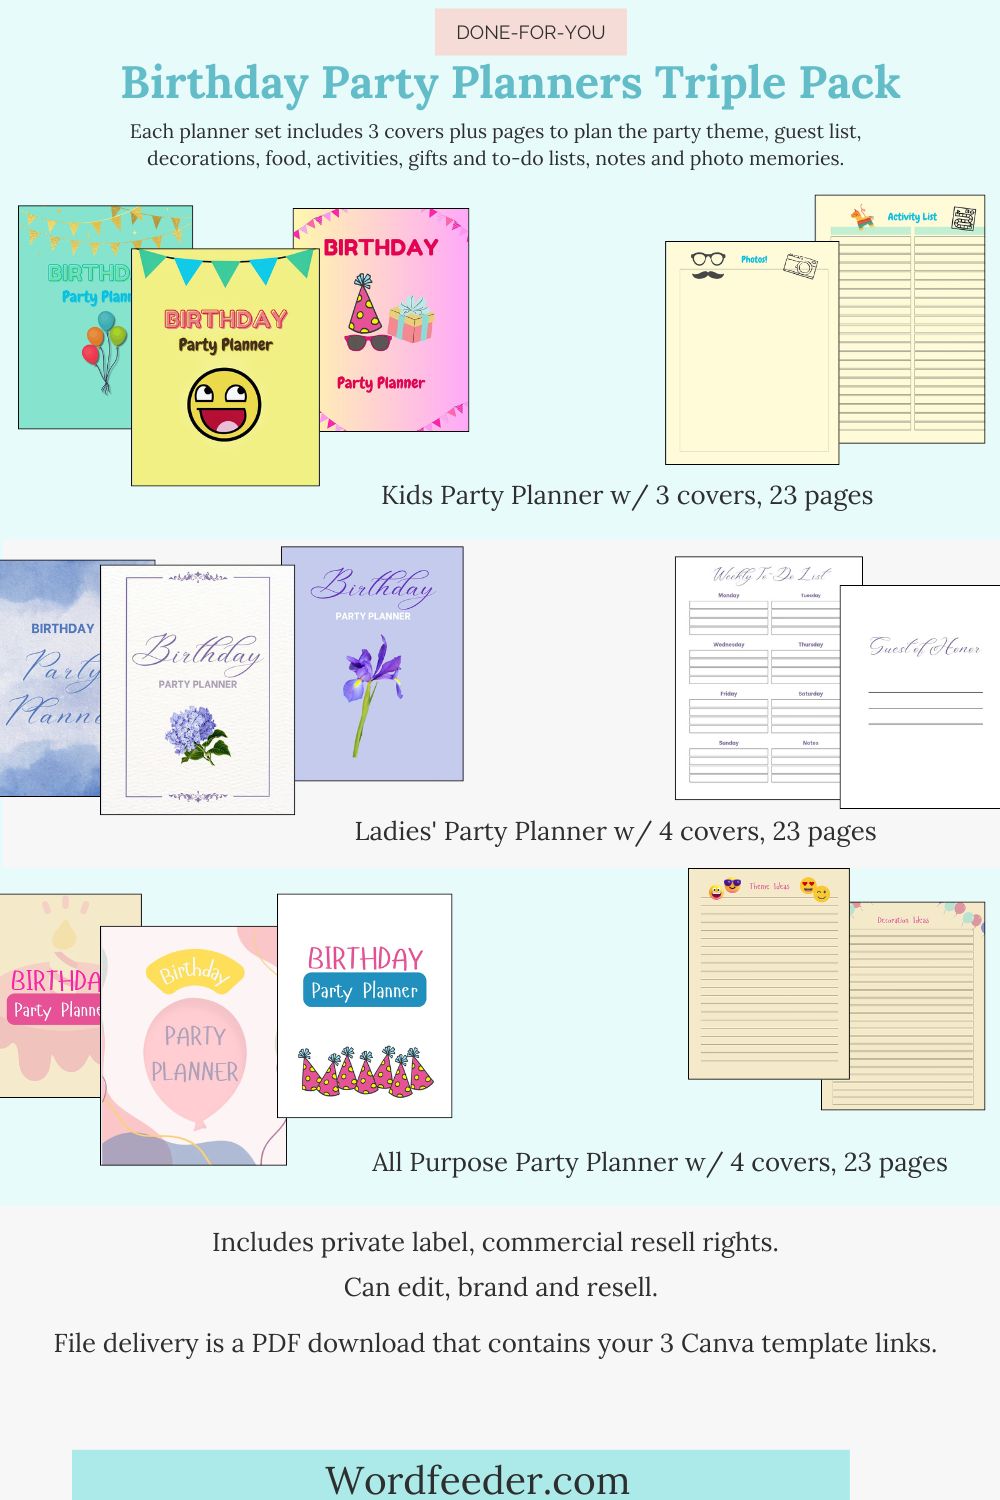 Birthday Party Planner Triple Pack 